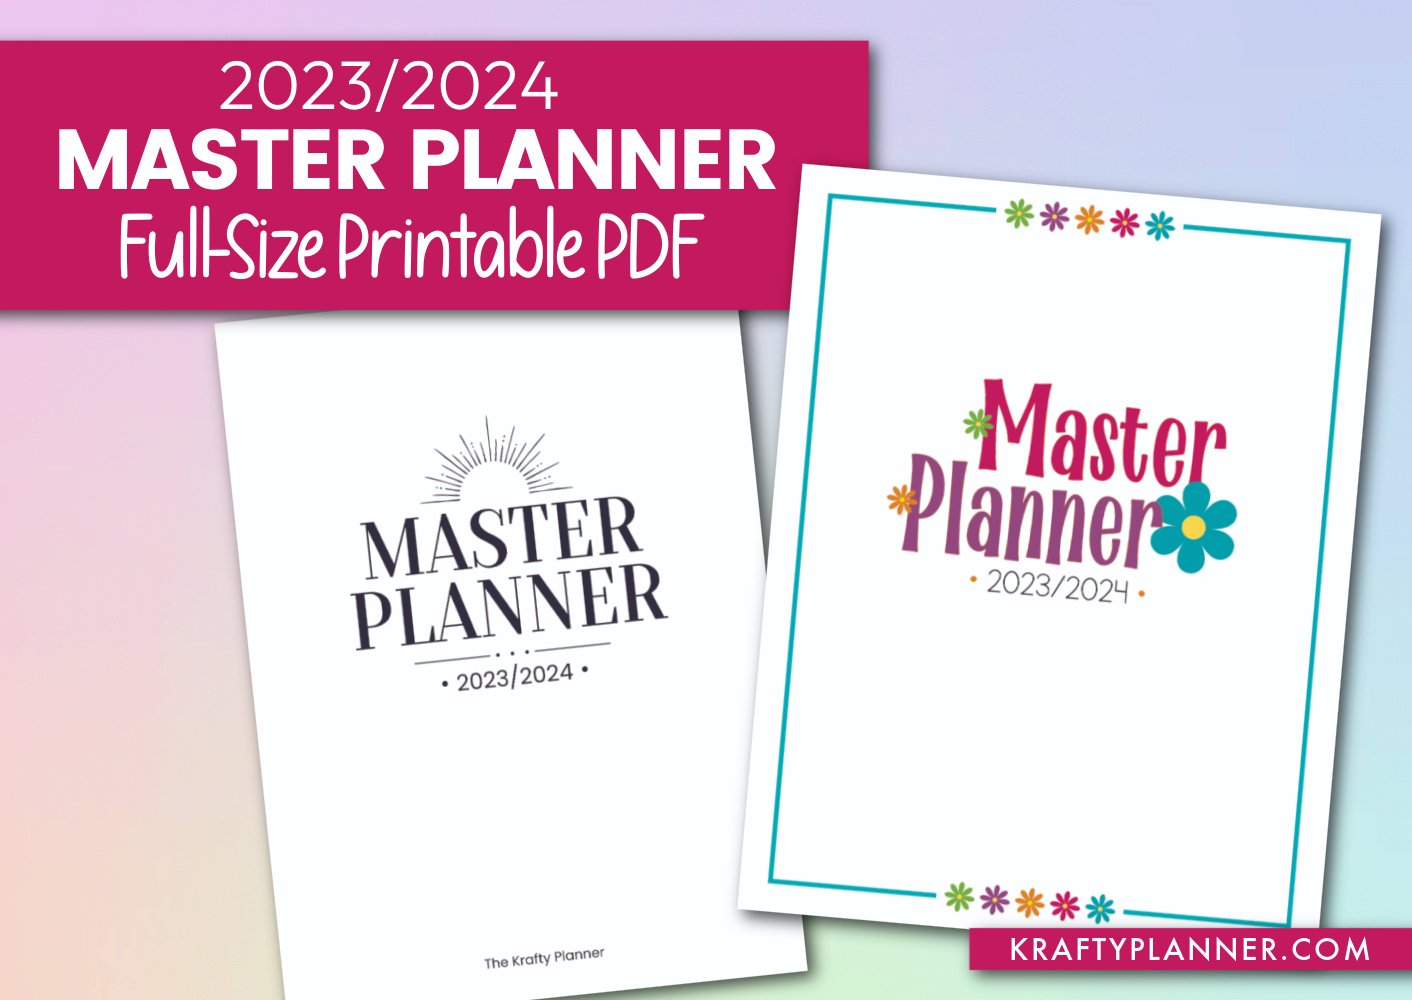 Introducing the 2023/2024 Master Planner: Your Ultimate Organizational Companion